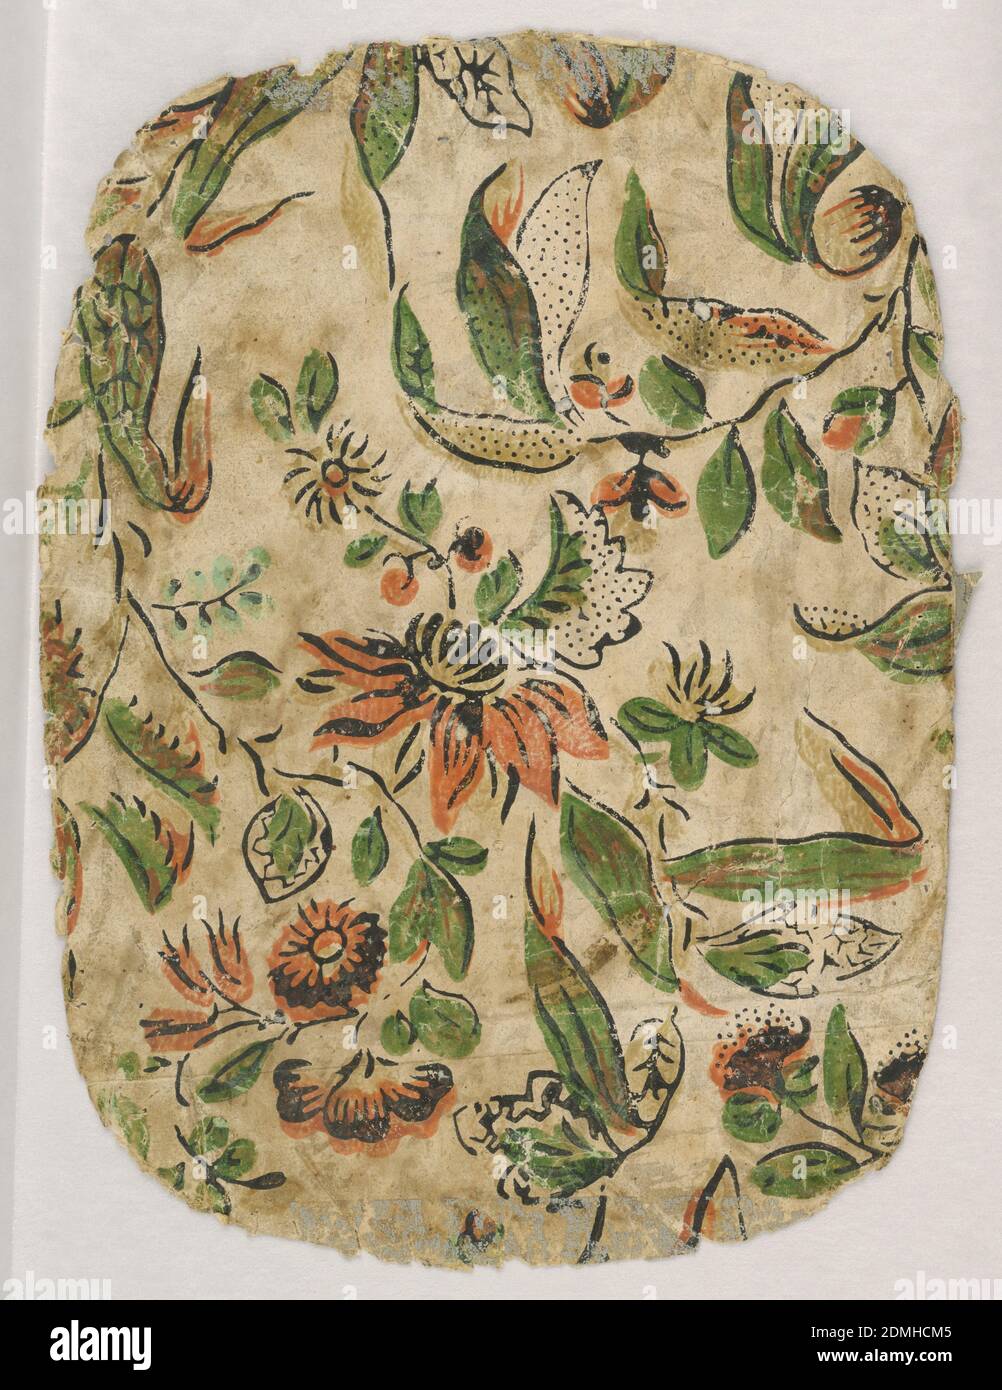 Sidewall and border, Block-printed on handmade paper, Floral design printed in red, green, yellow and black on natural paper background., USA, 1790–1810, Wallcoverings, Sidewall and border Stock Photo